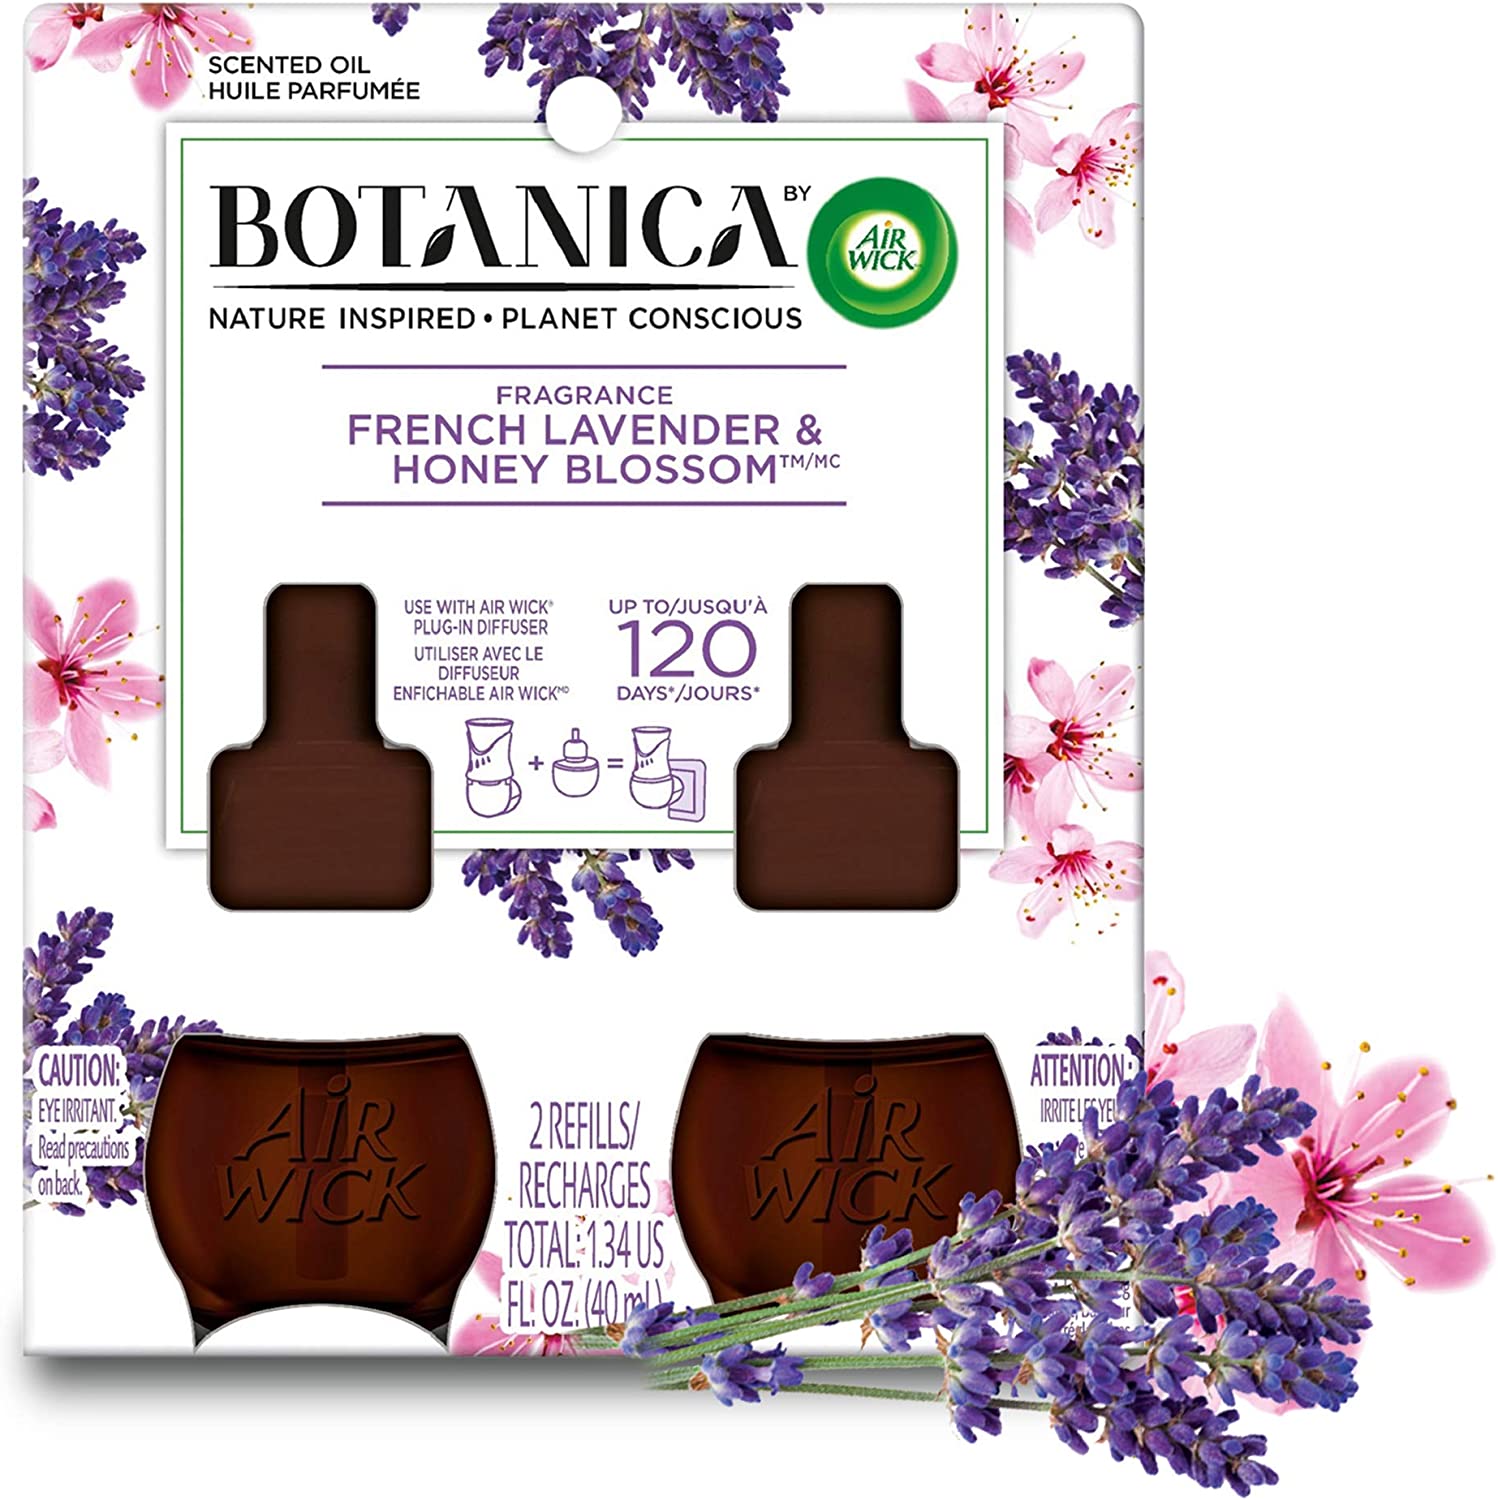 Botanica by Air Wick Plug in Scented Oil Refill, 2 Refills, French Lavender and Honey Blossom, Air Freshener, Essential Oils - AWBPISORFLHB2CT